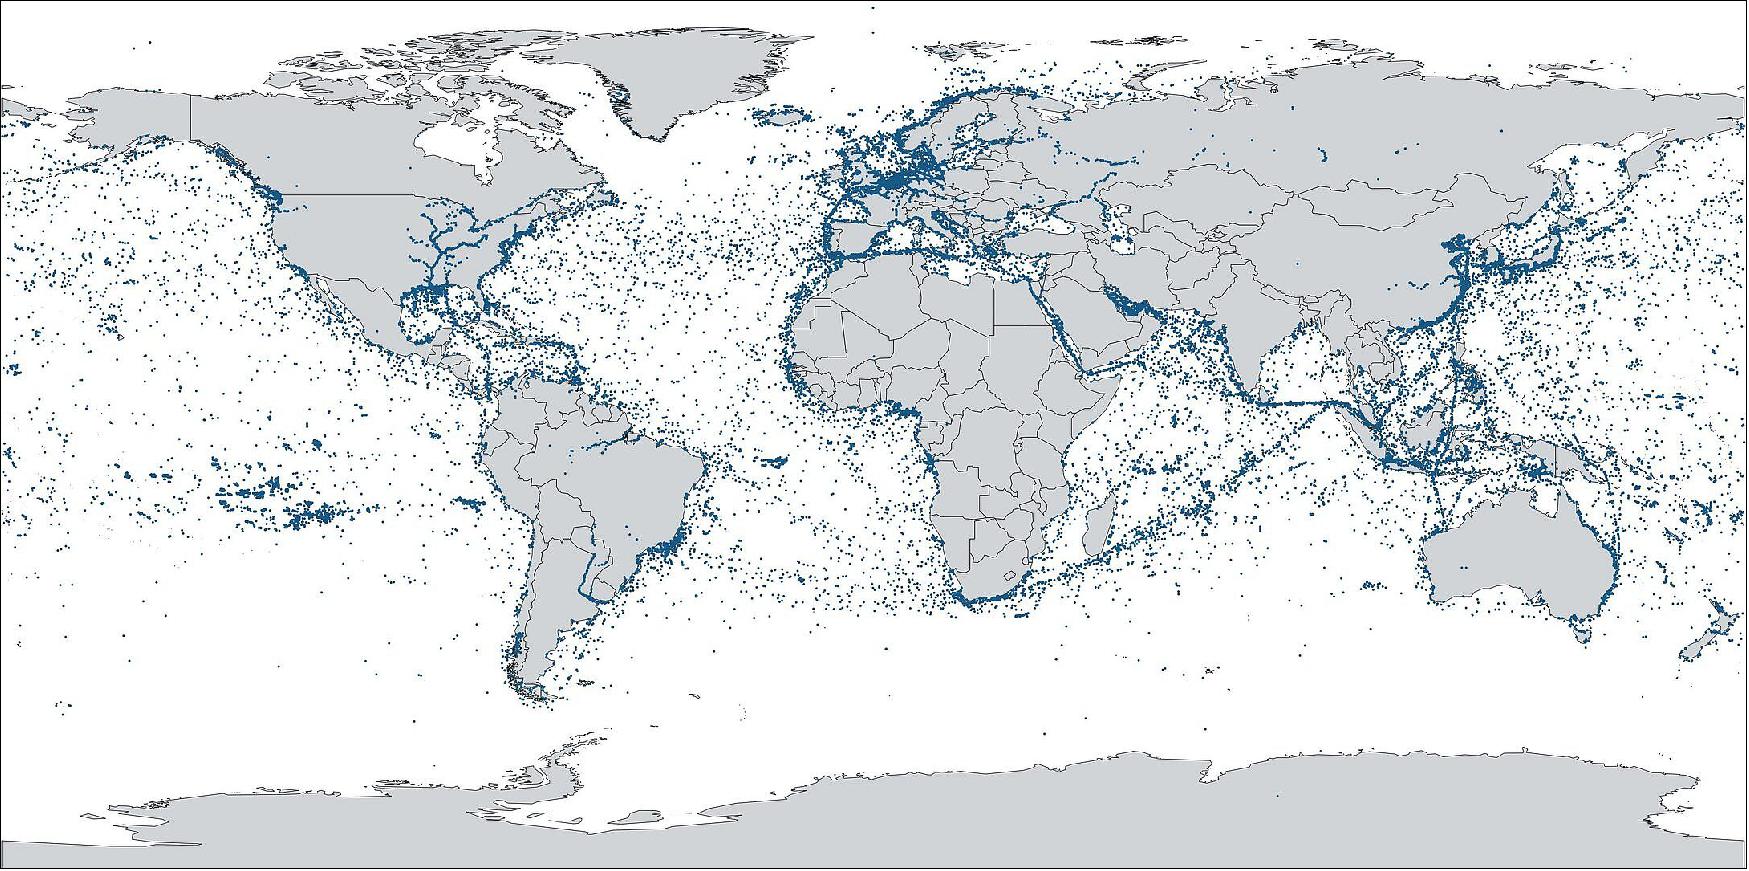 Figure 6: First map of global shipping captured by the ESAIL satellite (image credit: exactEarth)